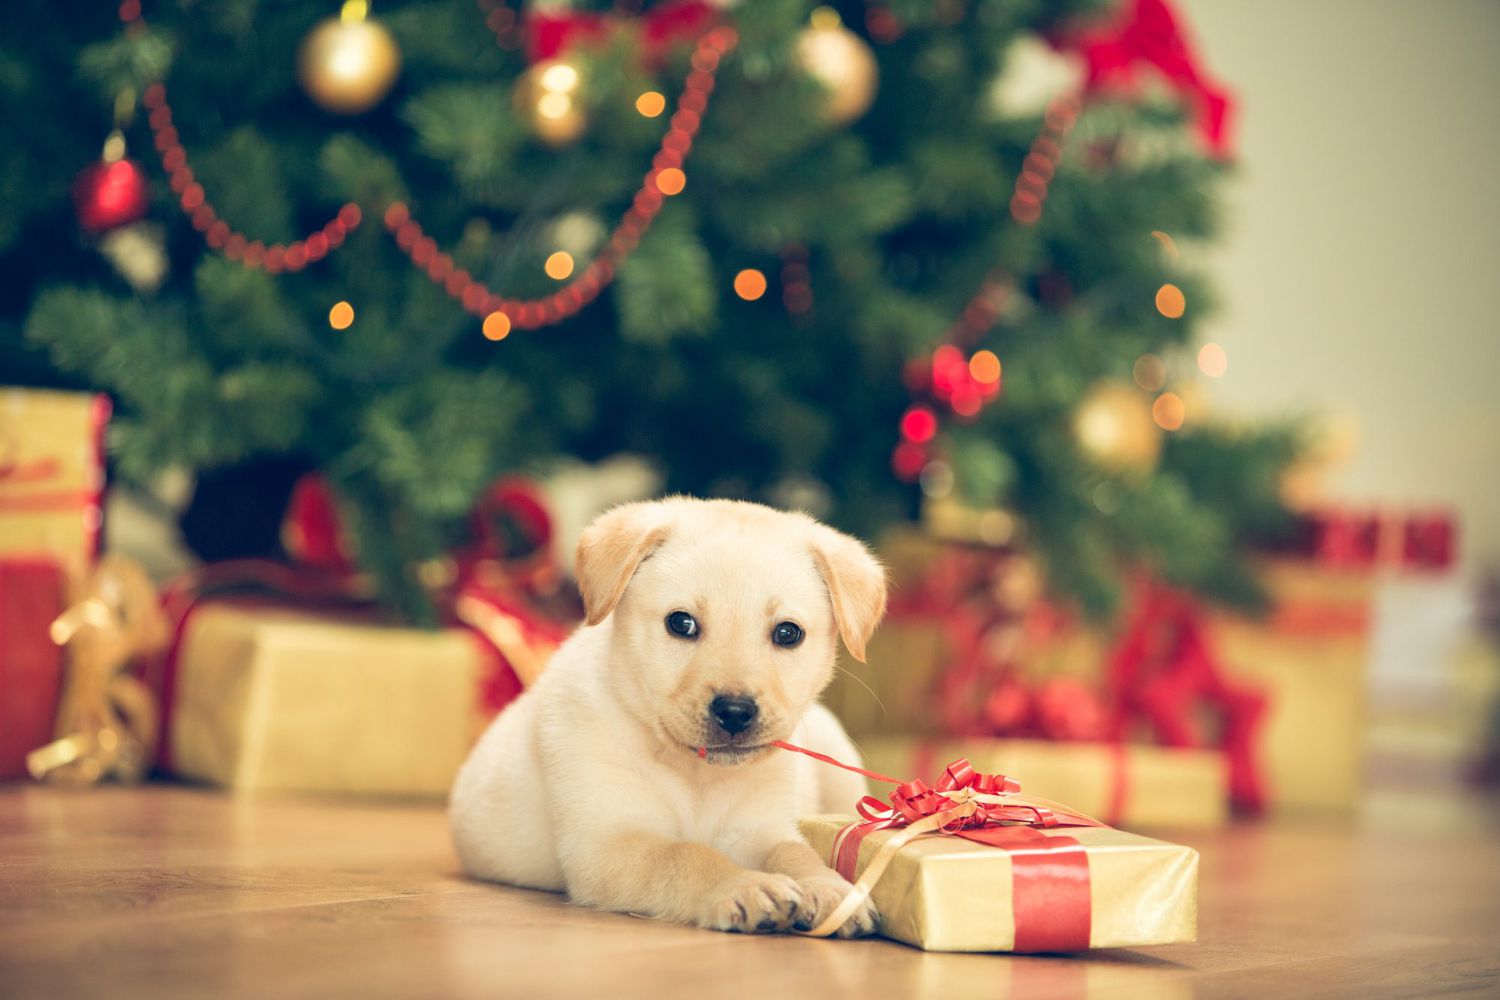 Gifting a Puppy: Ensuring You’re Ready for the Commitment